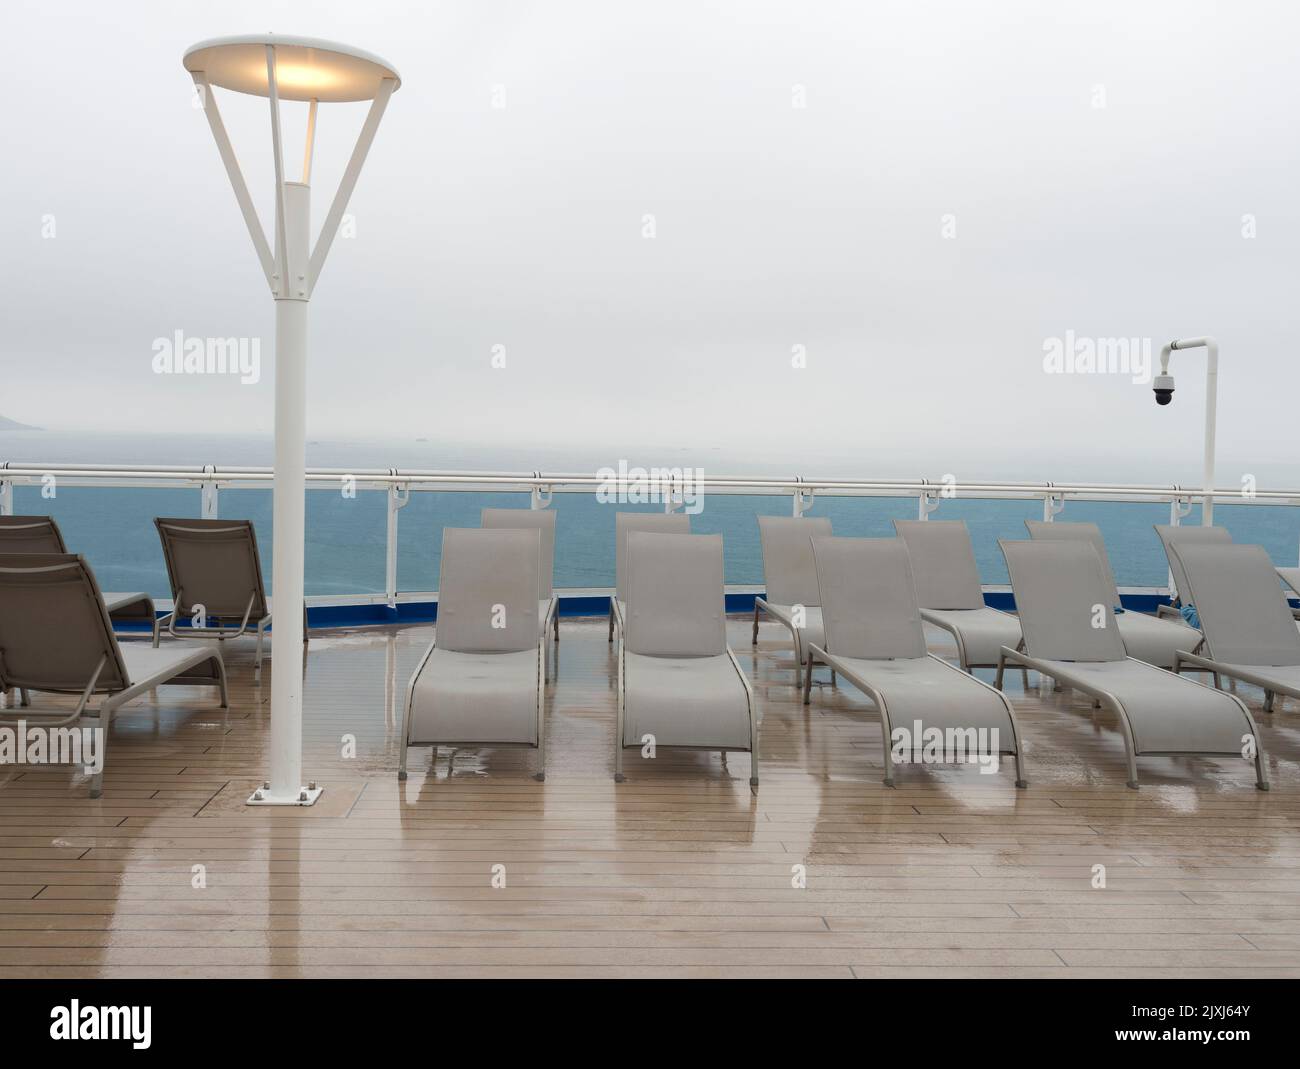 Surreal and paradoxical scene - wet afternoon on the sun deck  of a cruise liner in the North Sea. It is spookily deserted, with a grey, featureless s Stock Photo